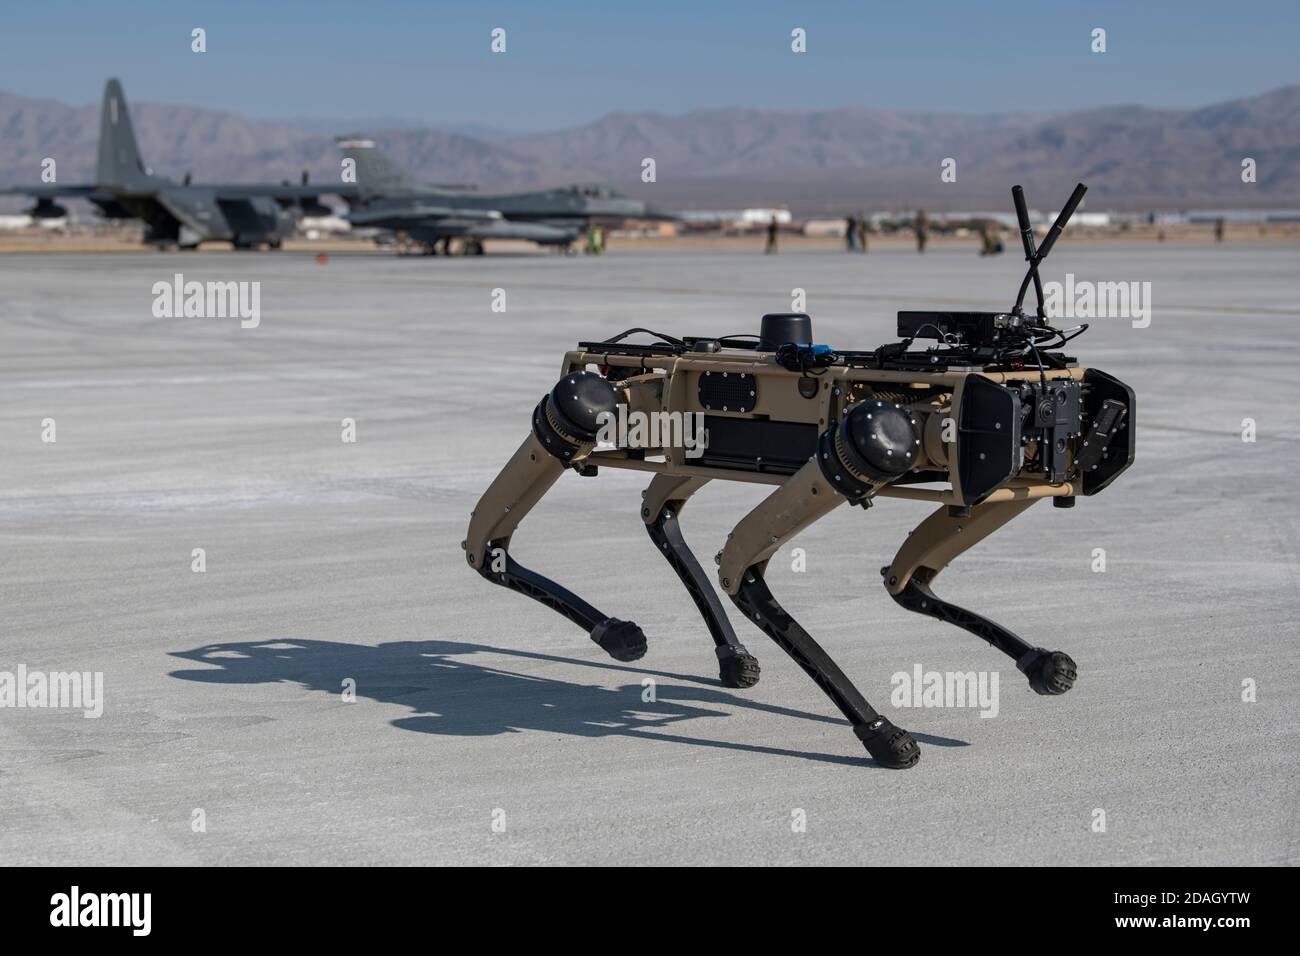 A U.S. Air Force Ghost Q-UGV unmanned ground vehicle known as the robotic dog, is tested during the Advanced Battle Management System exercise at Nellis Air Force Base September 1, 2020 in Las Vegas, Nevada. Stock Photo